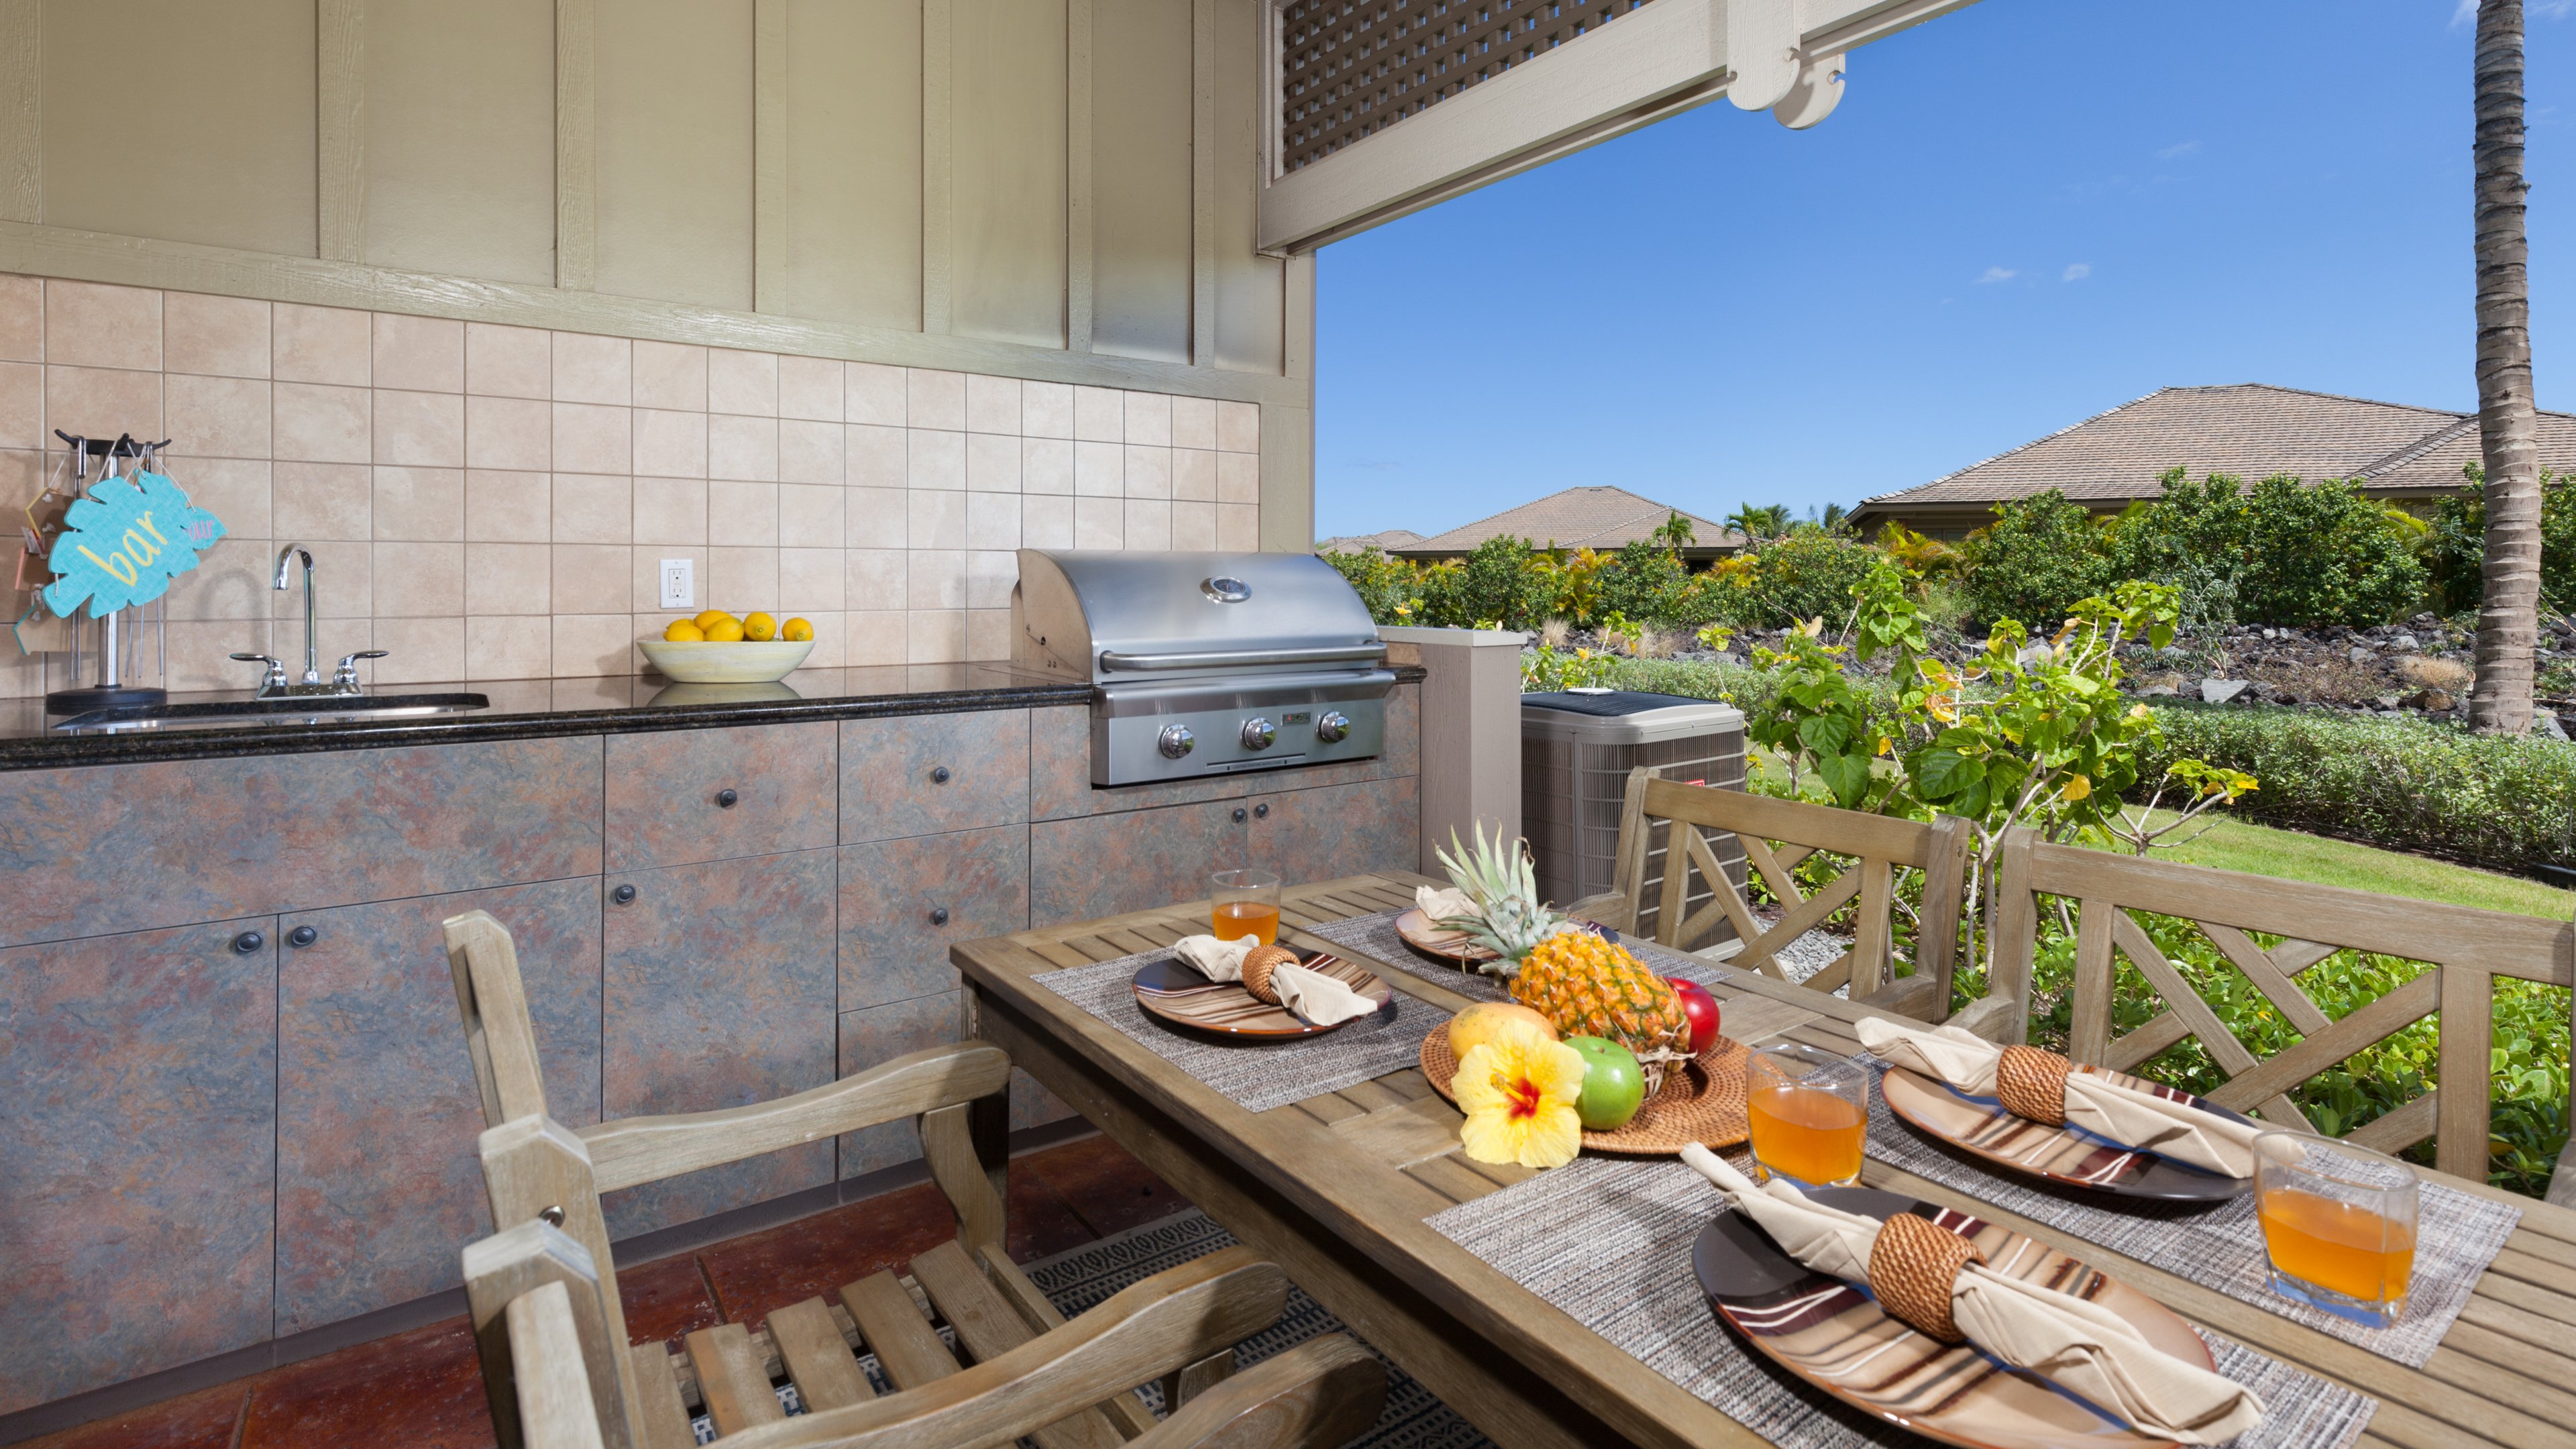 Private outdoor kitchen and grill